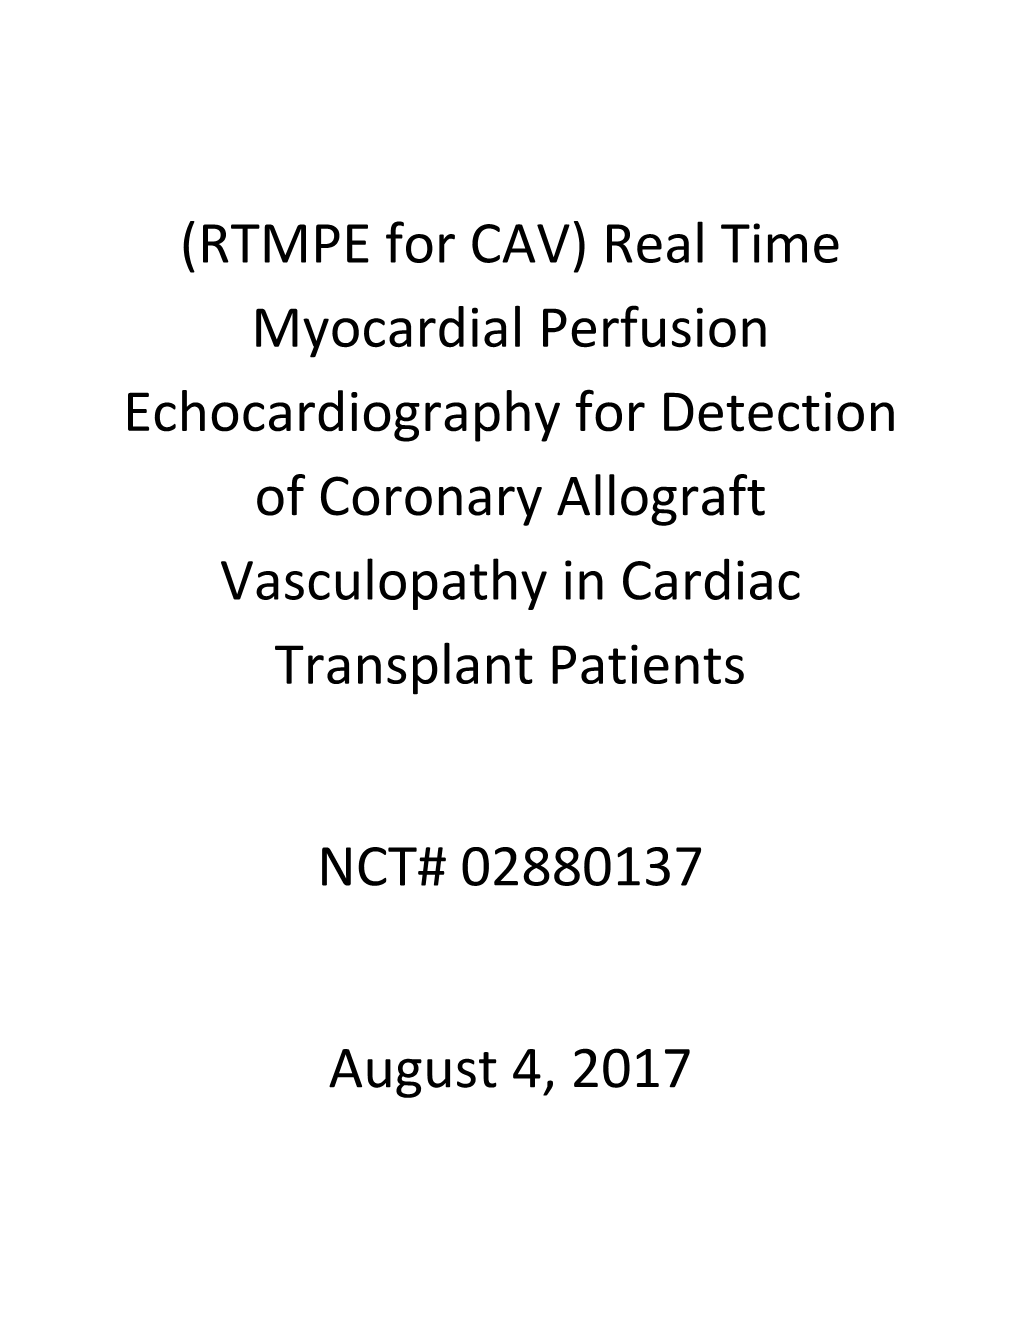 Real Time Myocardial Perfusion Echocardiography for Detection of Coronary Allograft Vasculopathy in Cardiac Transplant Patients